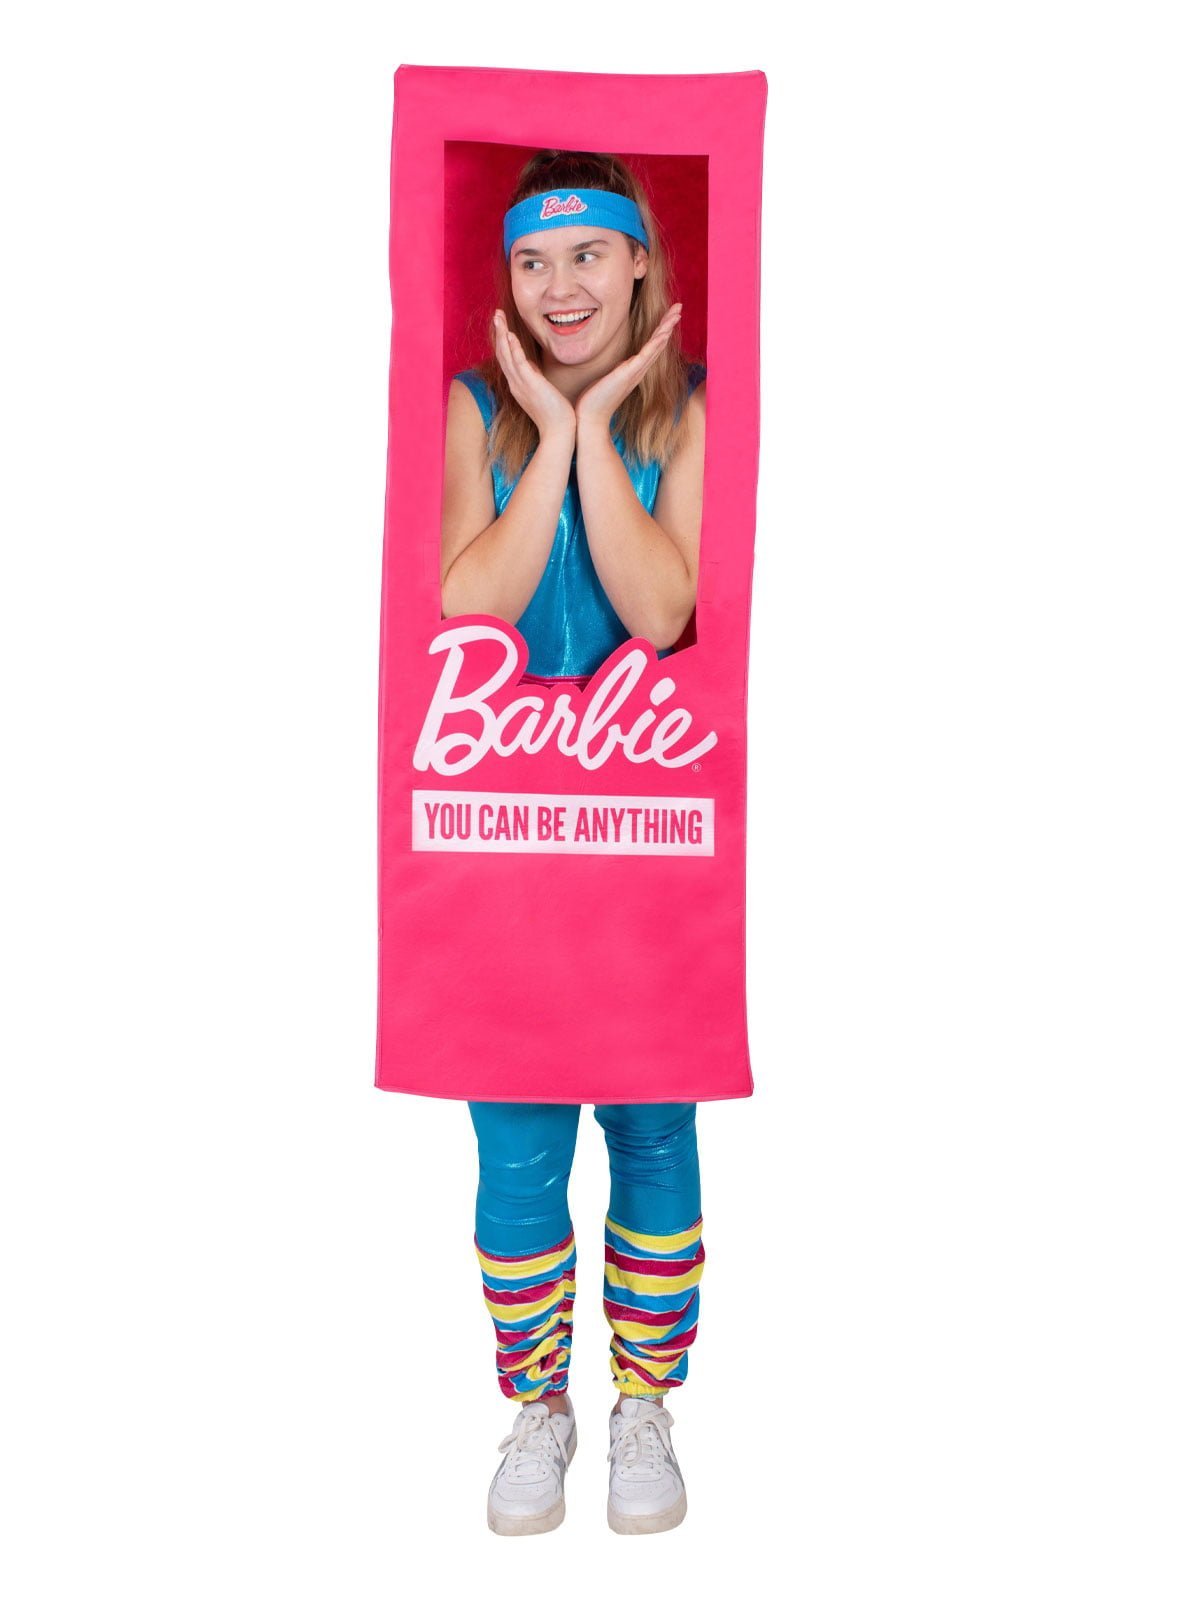 Featured image for “Barbie Lifesize Doll Box”